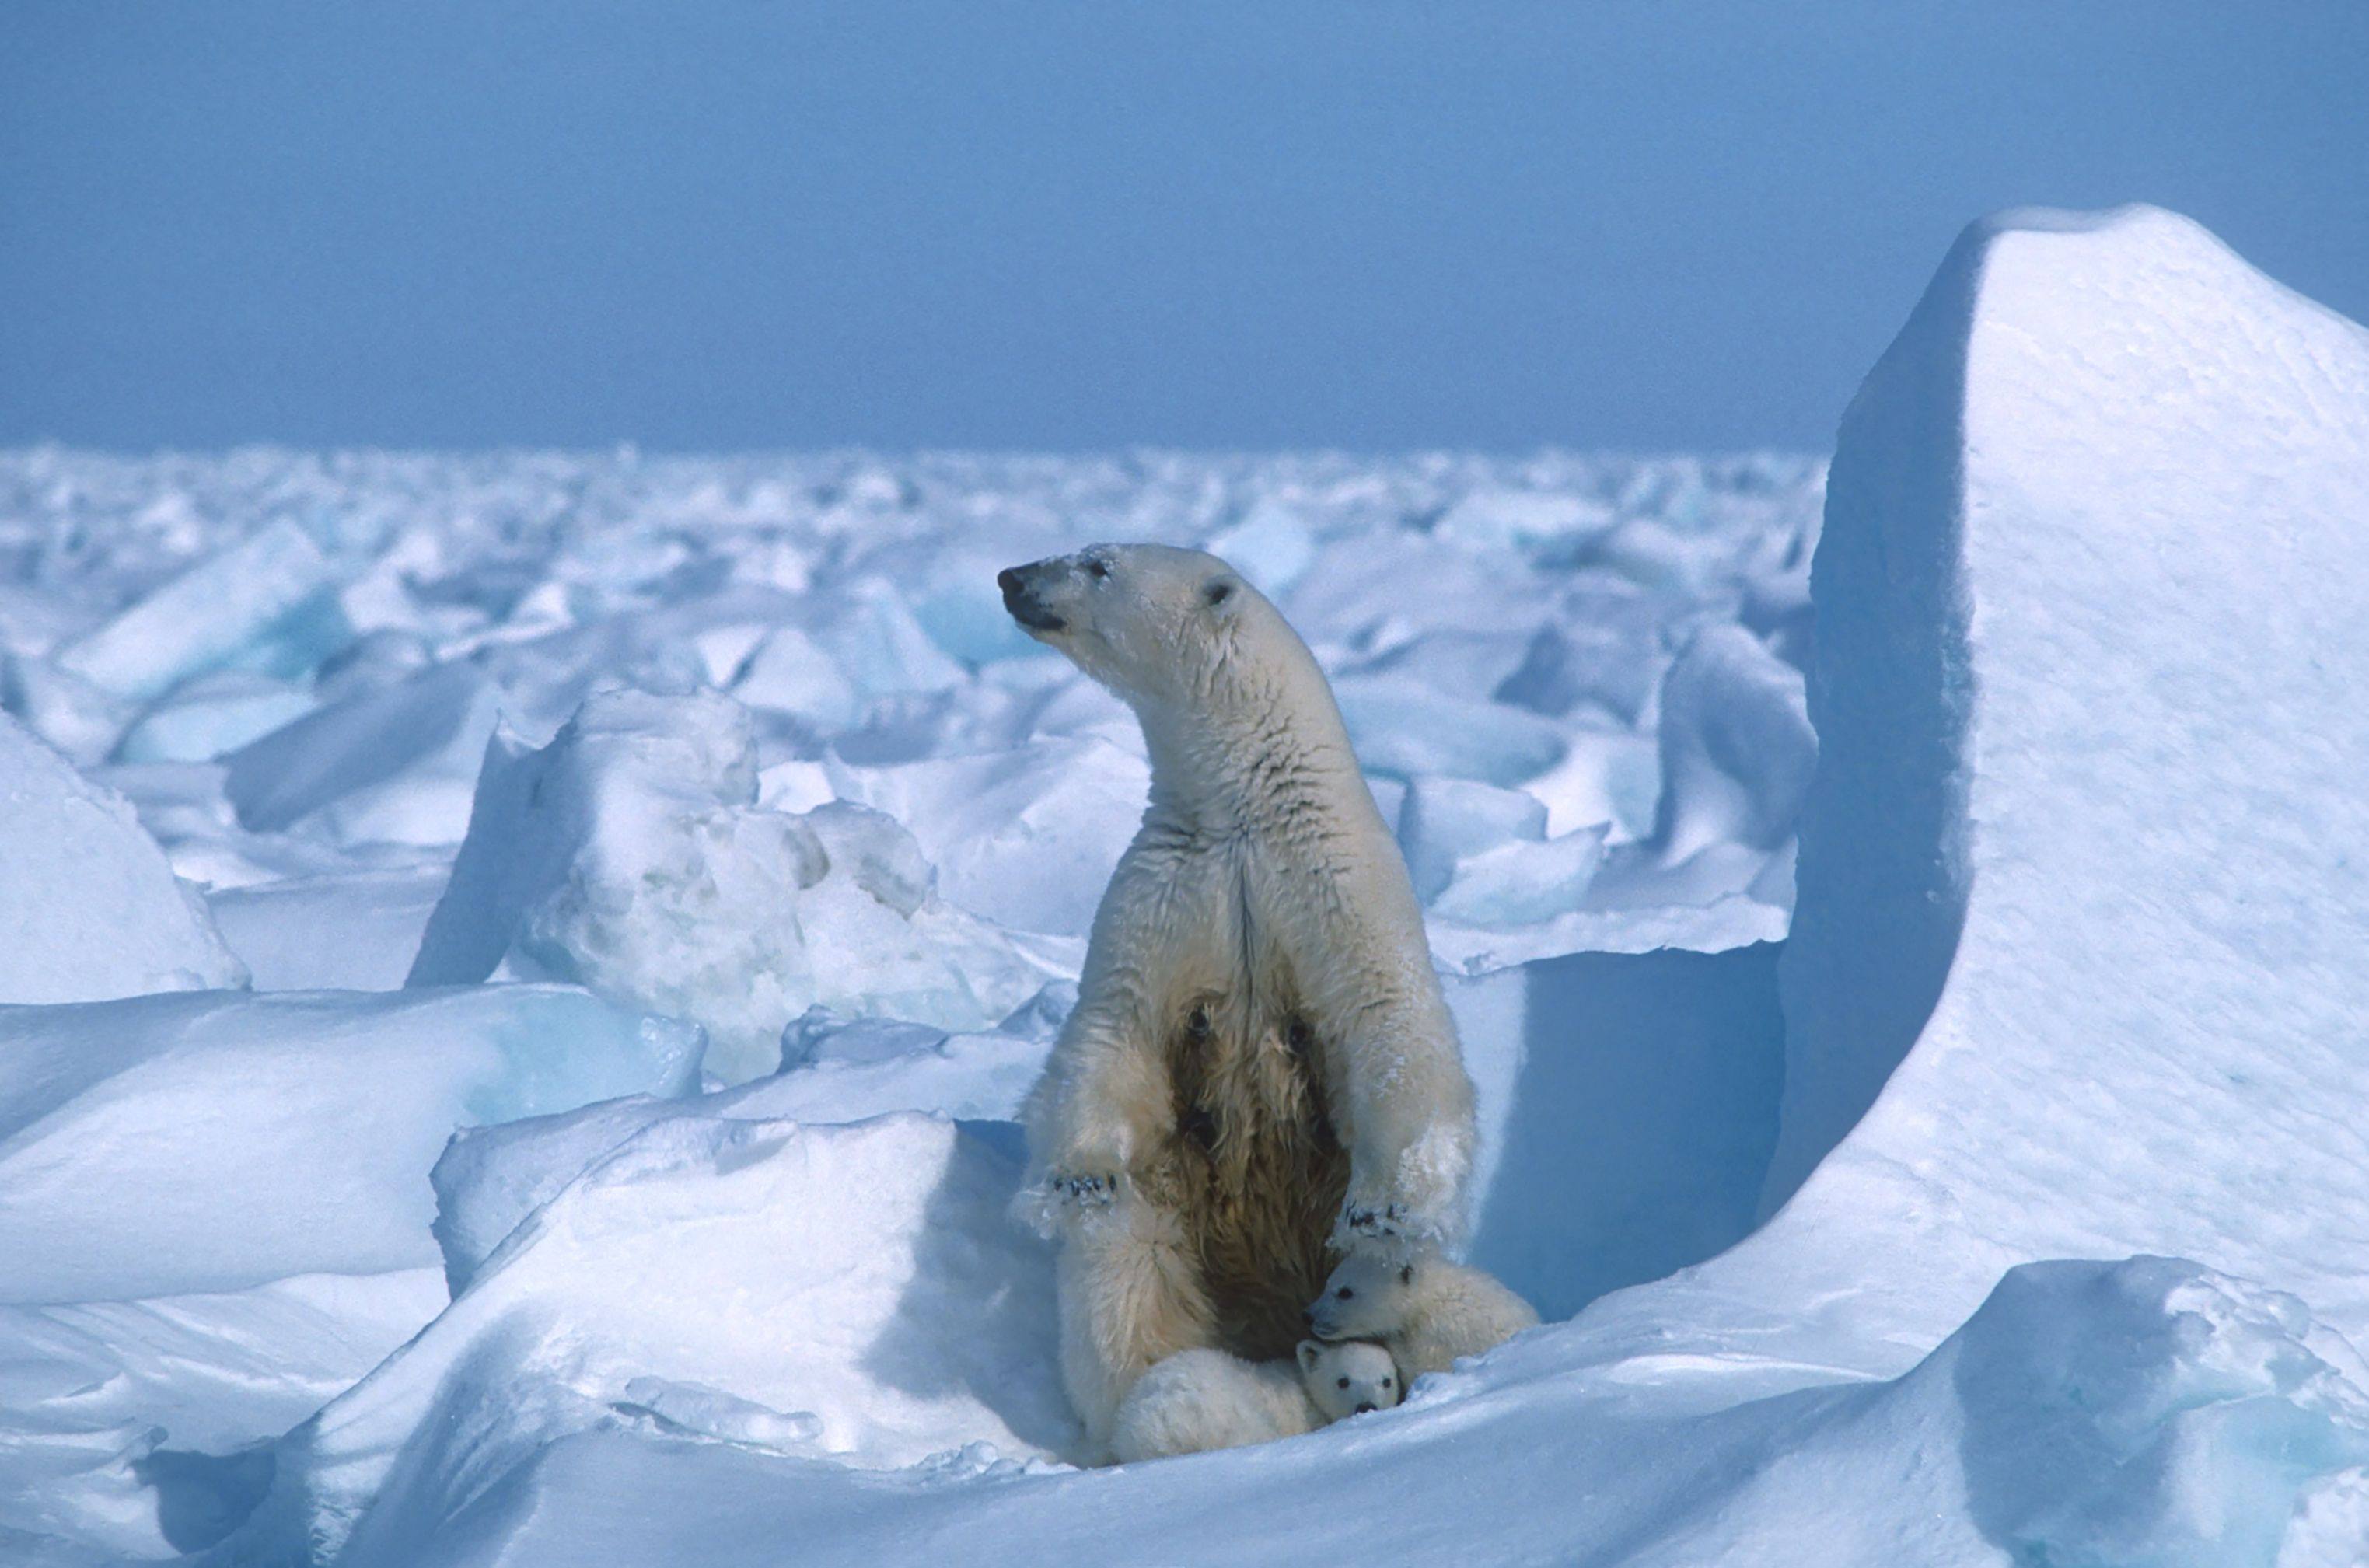 The Arctic Council carries out important research, including on polar bears. Photo: AFP